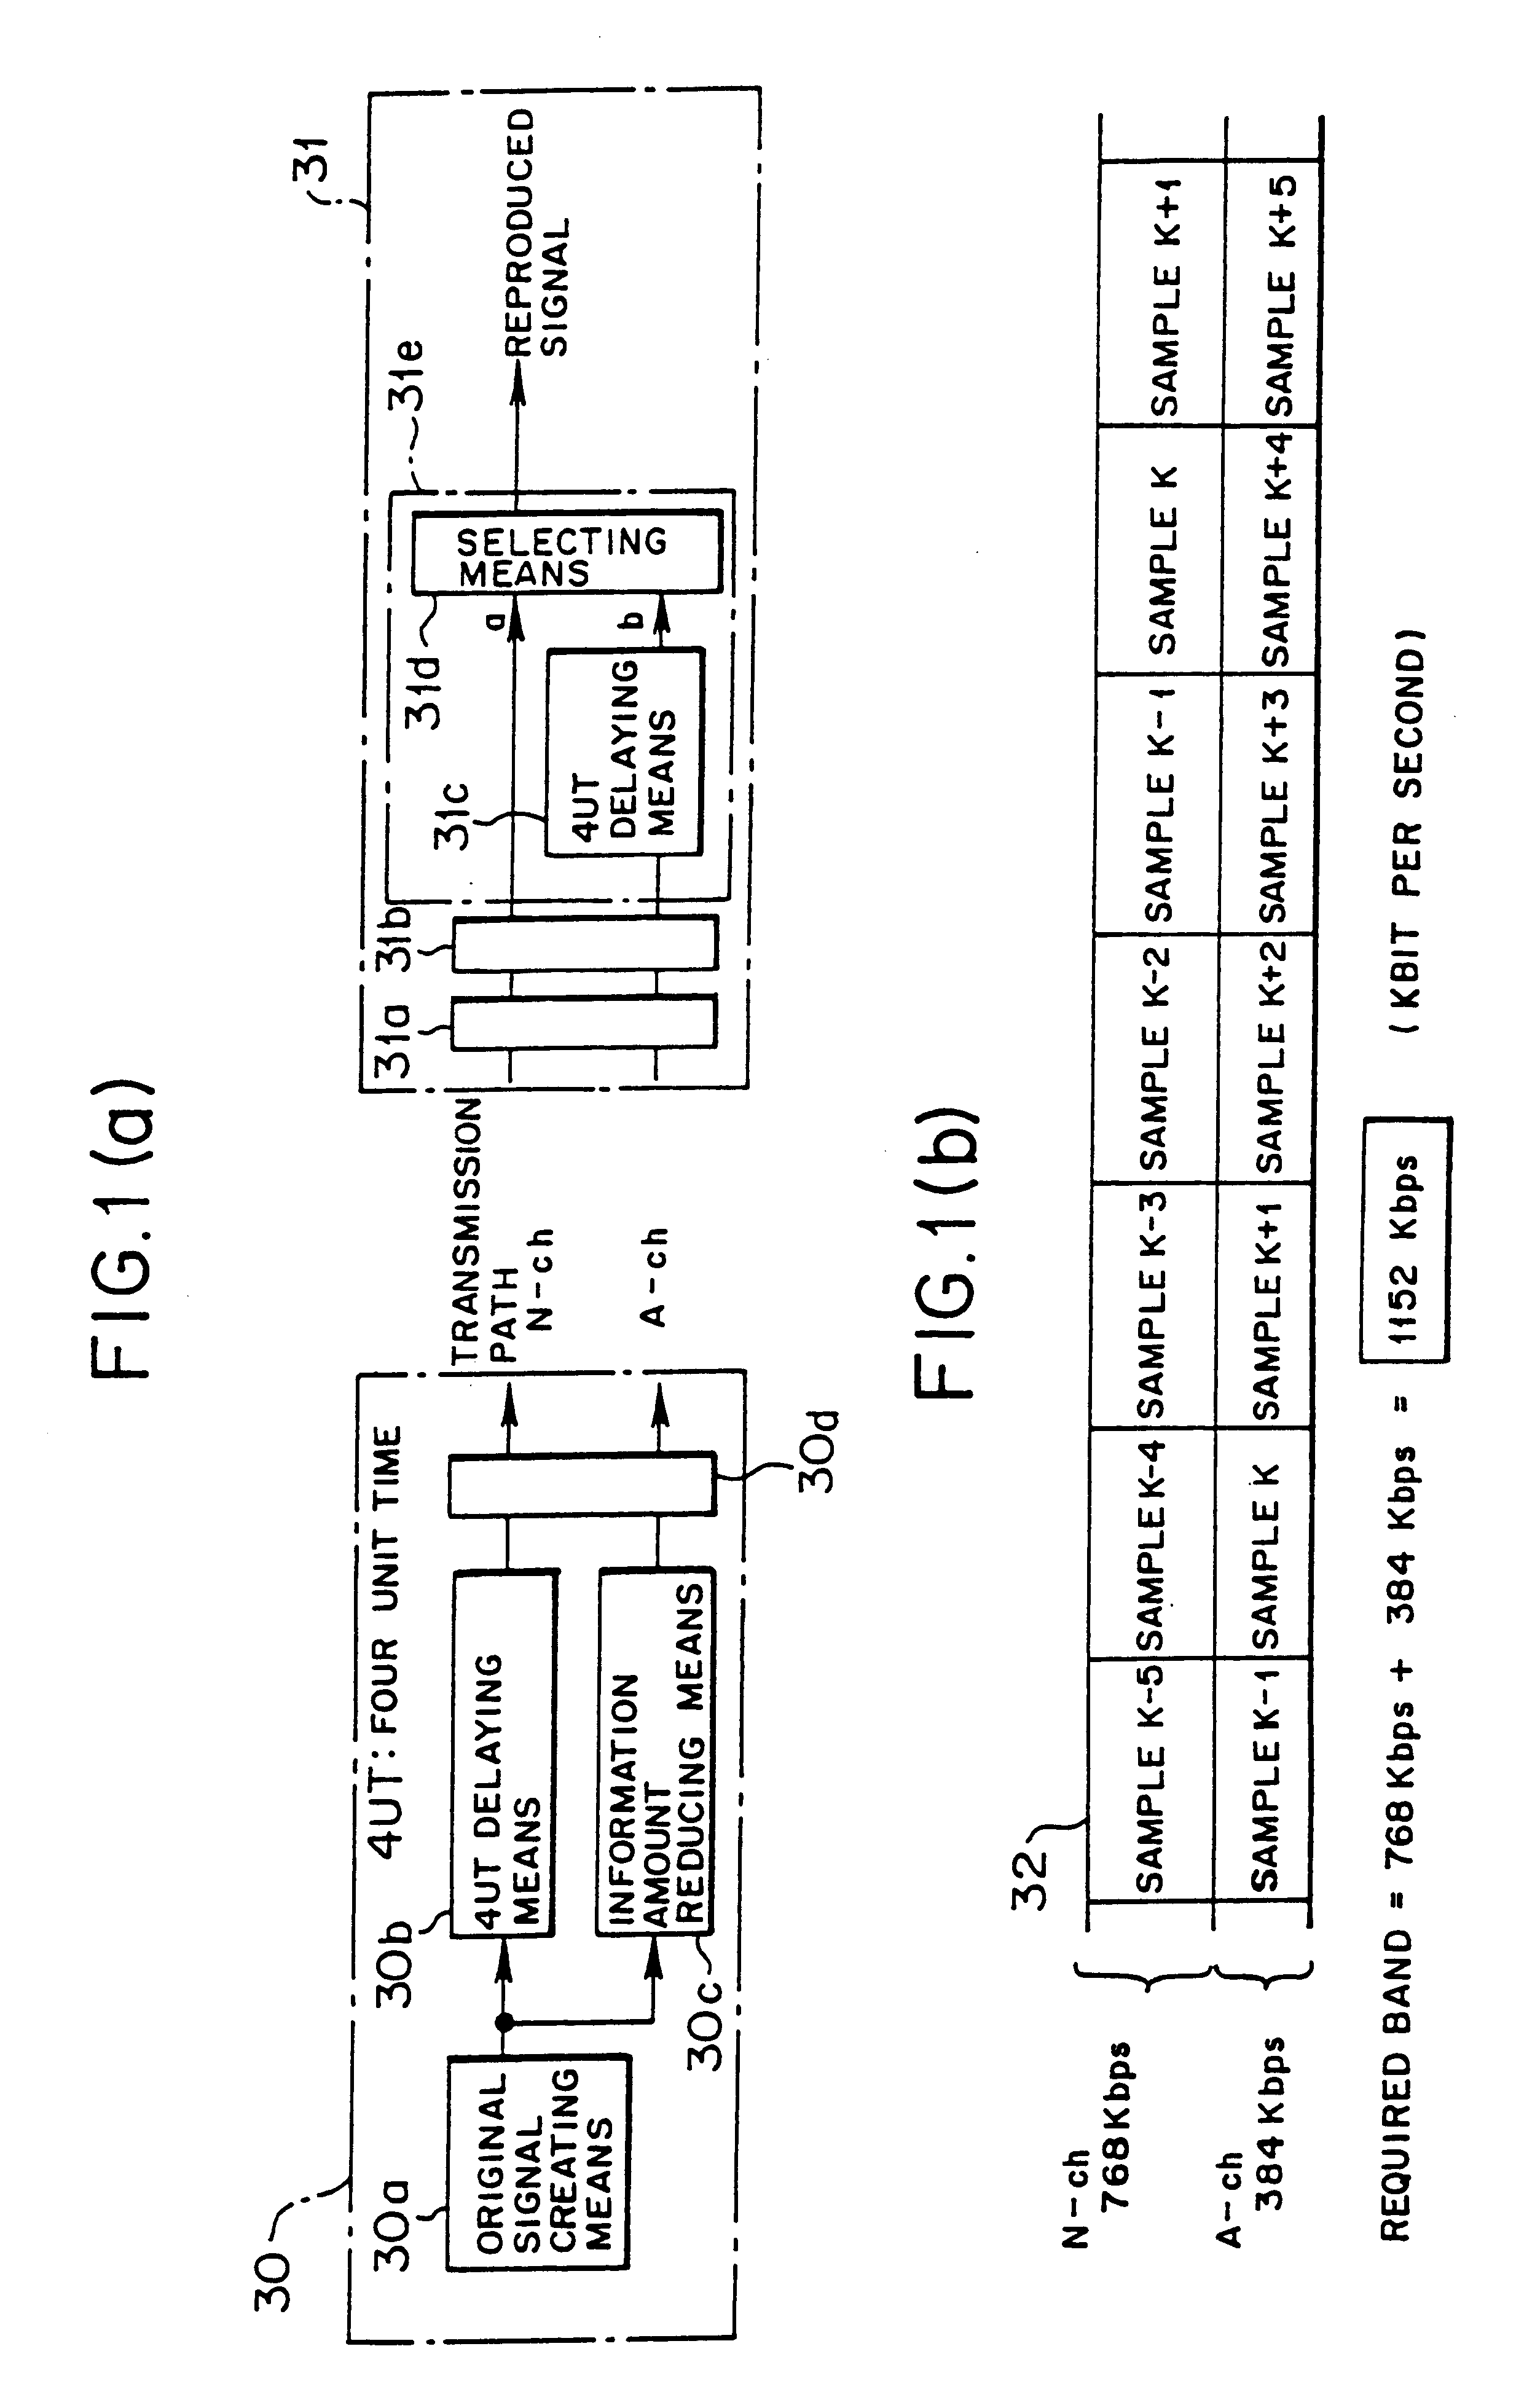 Method, system and apparatus for transmitting, receiving, and reproducing a digital broadcast signal